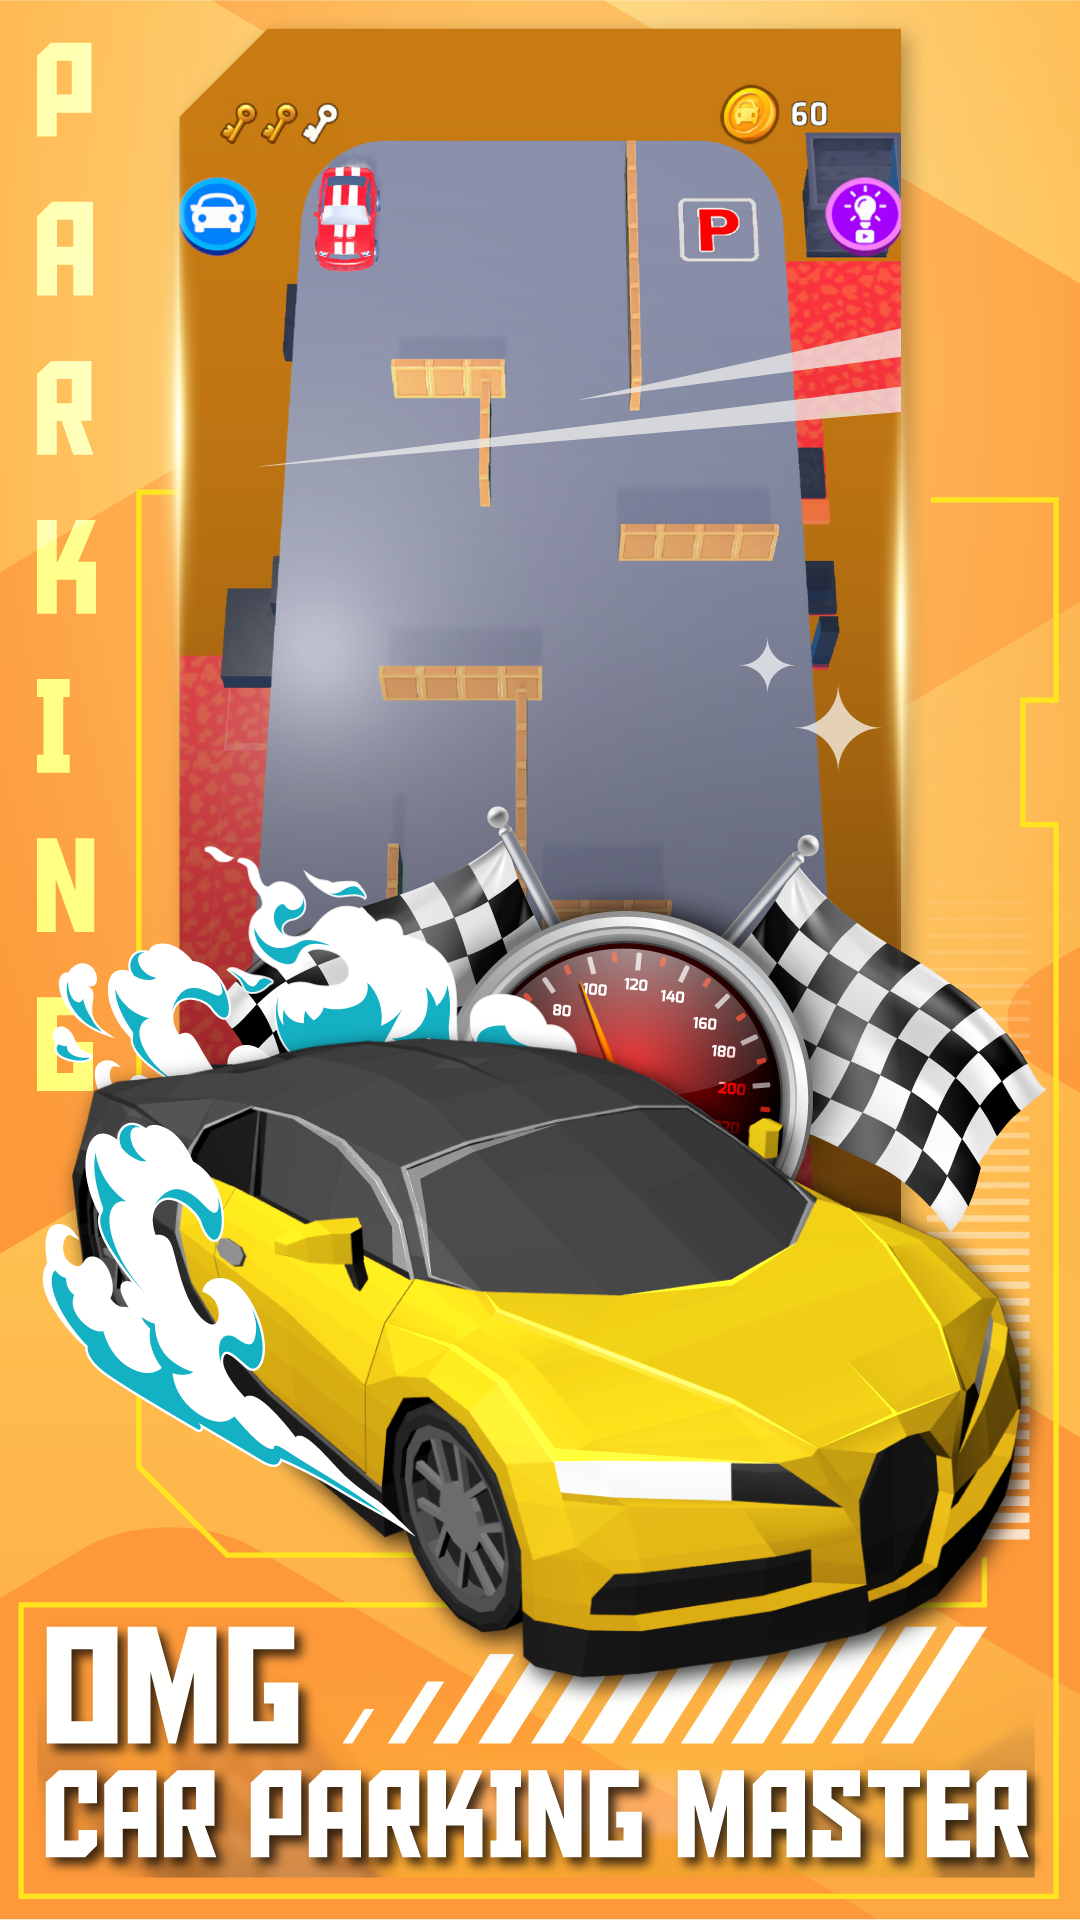 Car Parking APK (Android Game) - Free Download